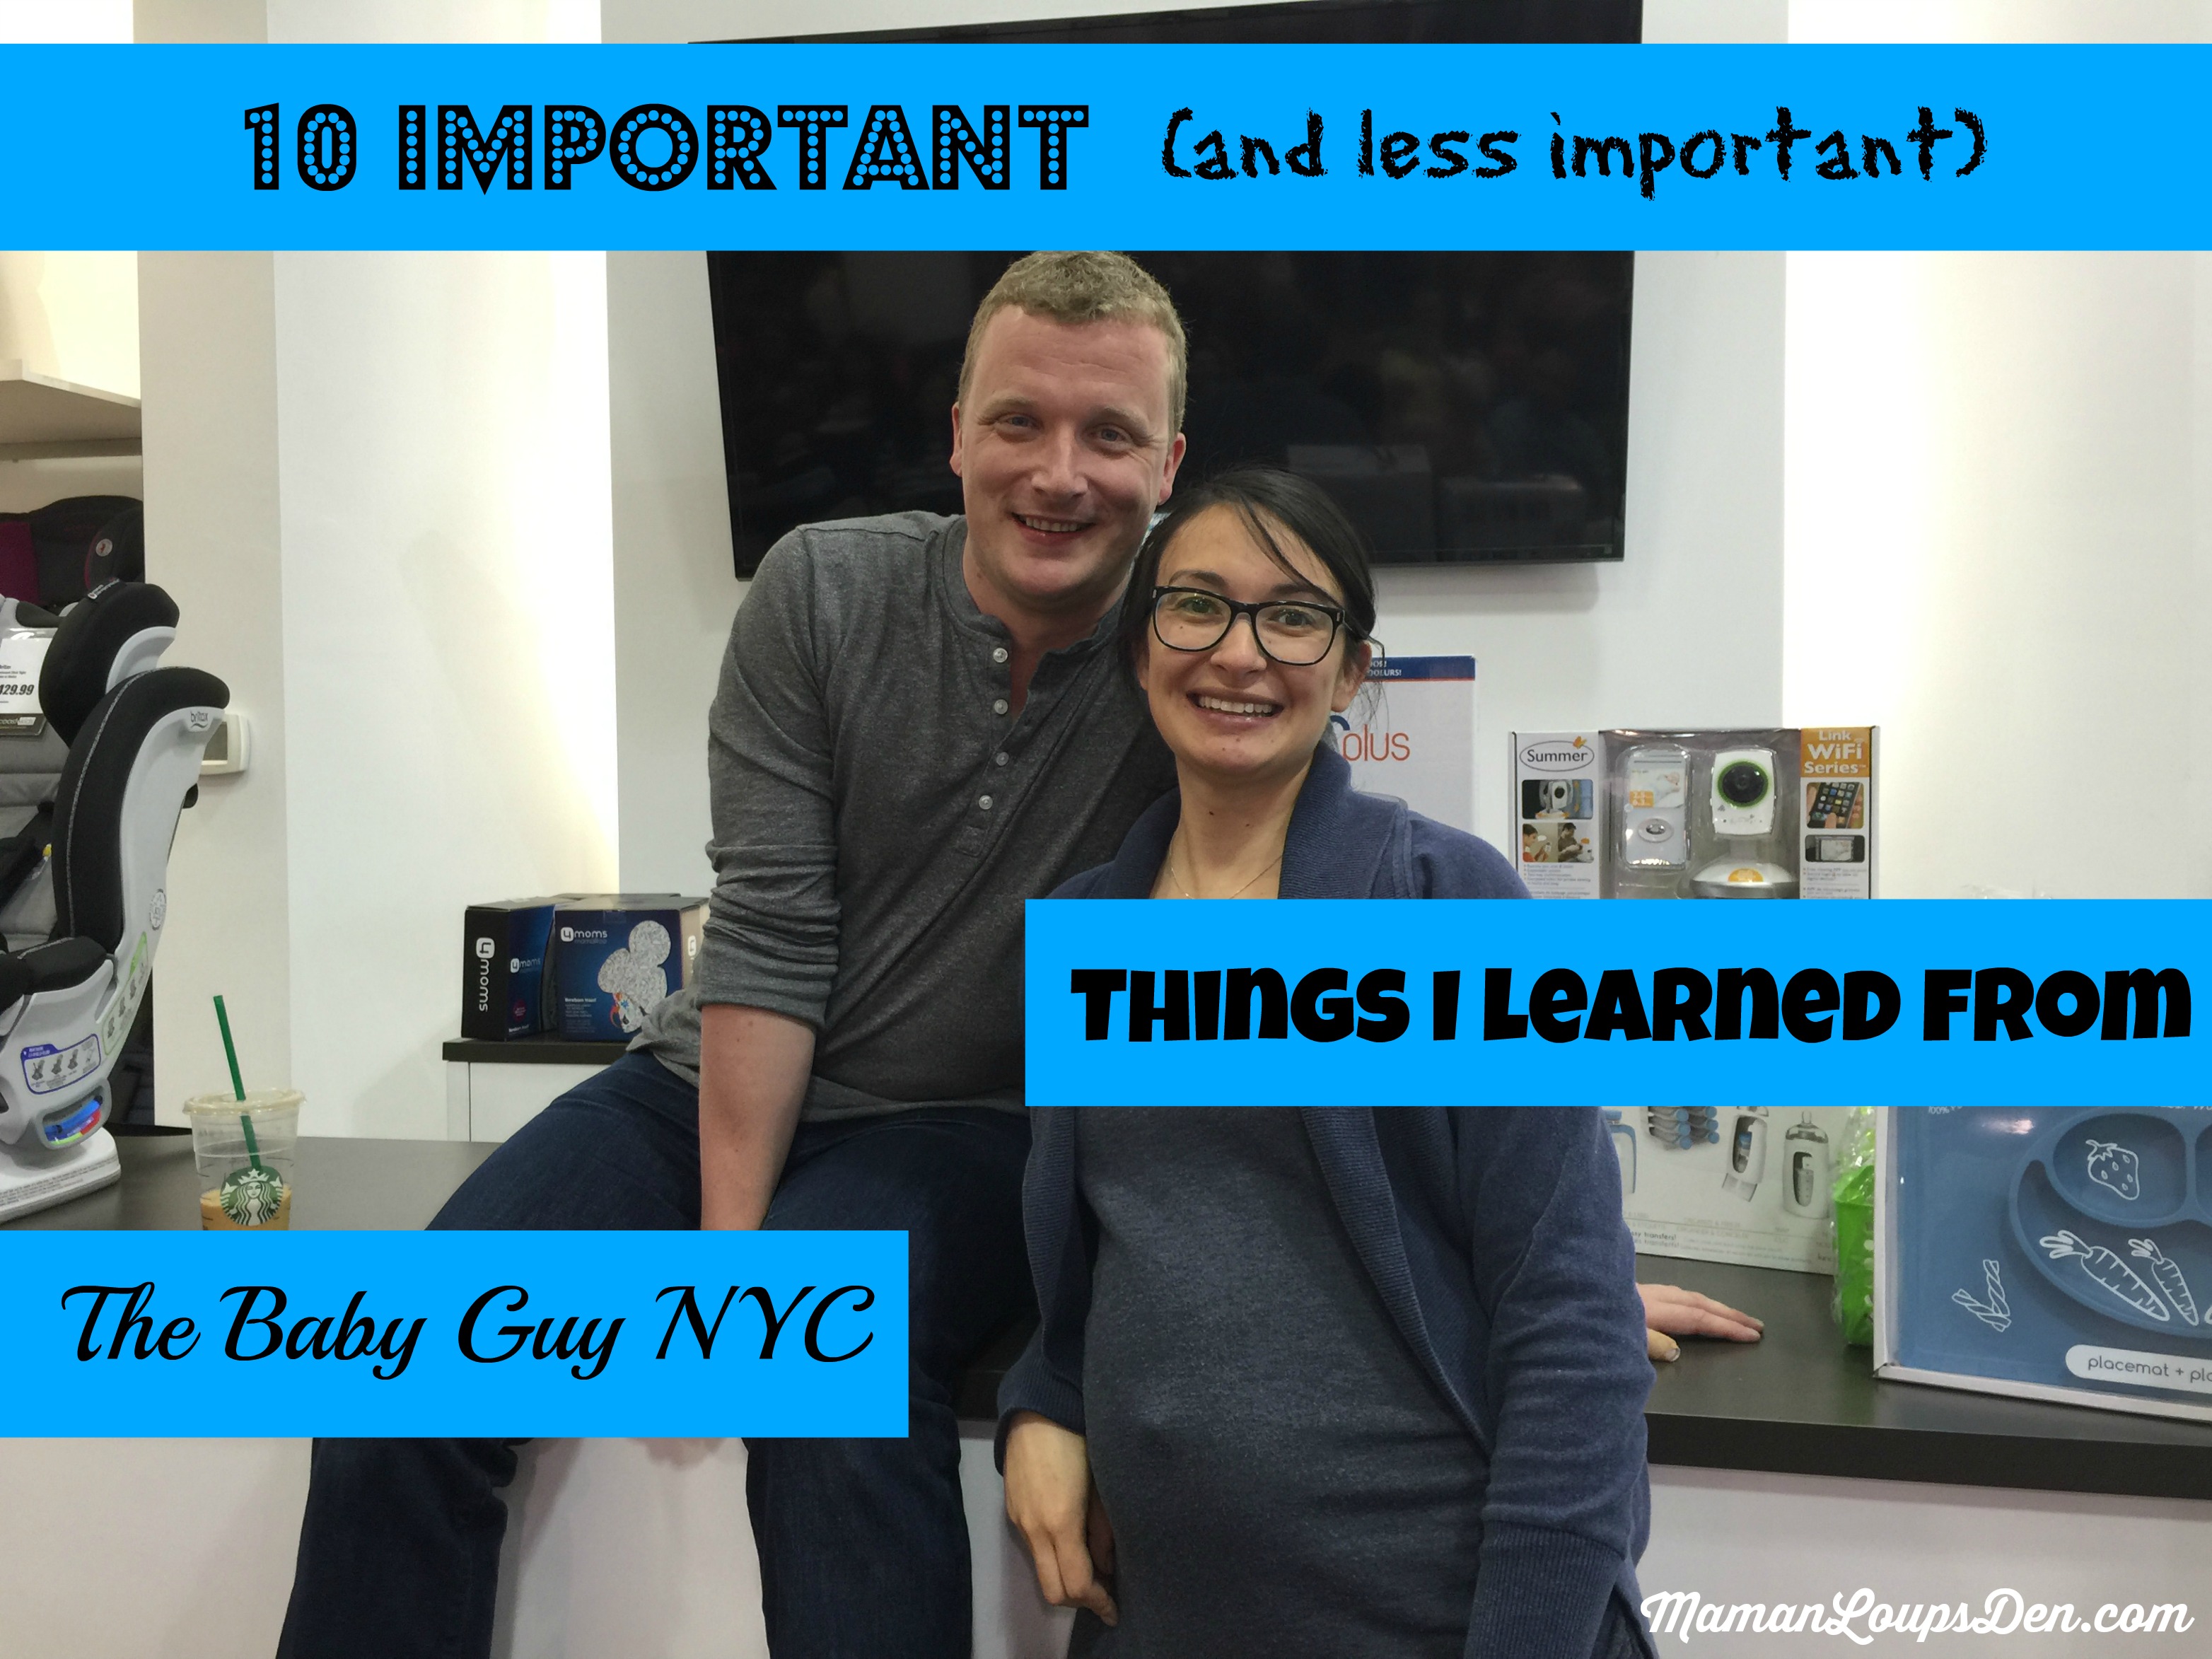 10 Important (and less important) things I learned from The Baby Guy NYC